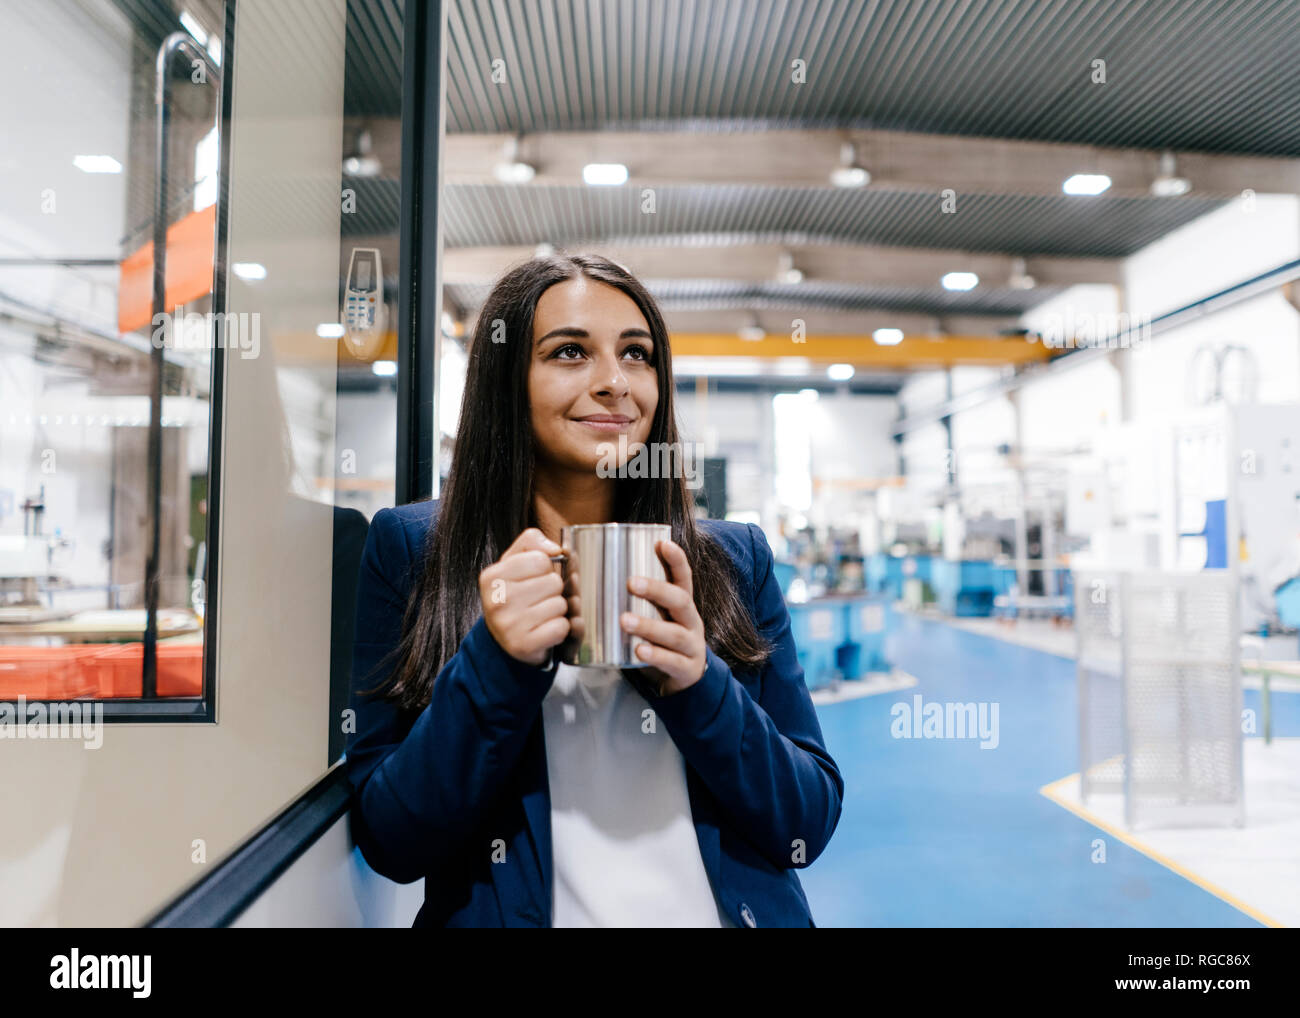 Confident woman working in high tech enterprise, drinking coffee Stock Photo